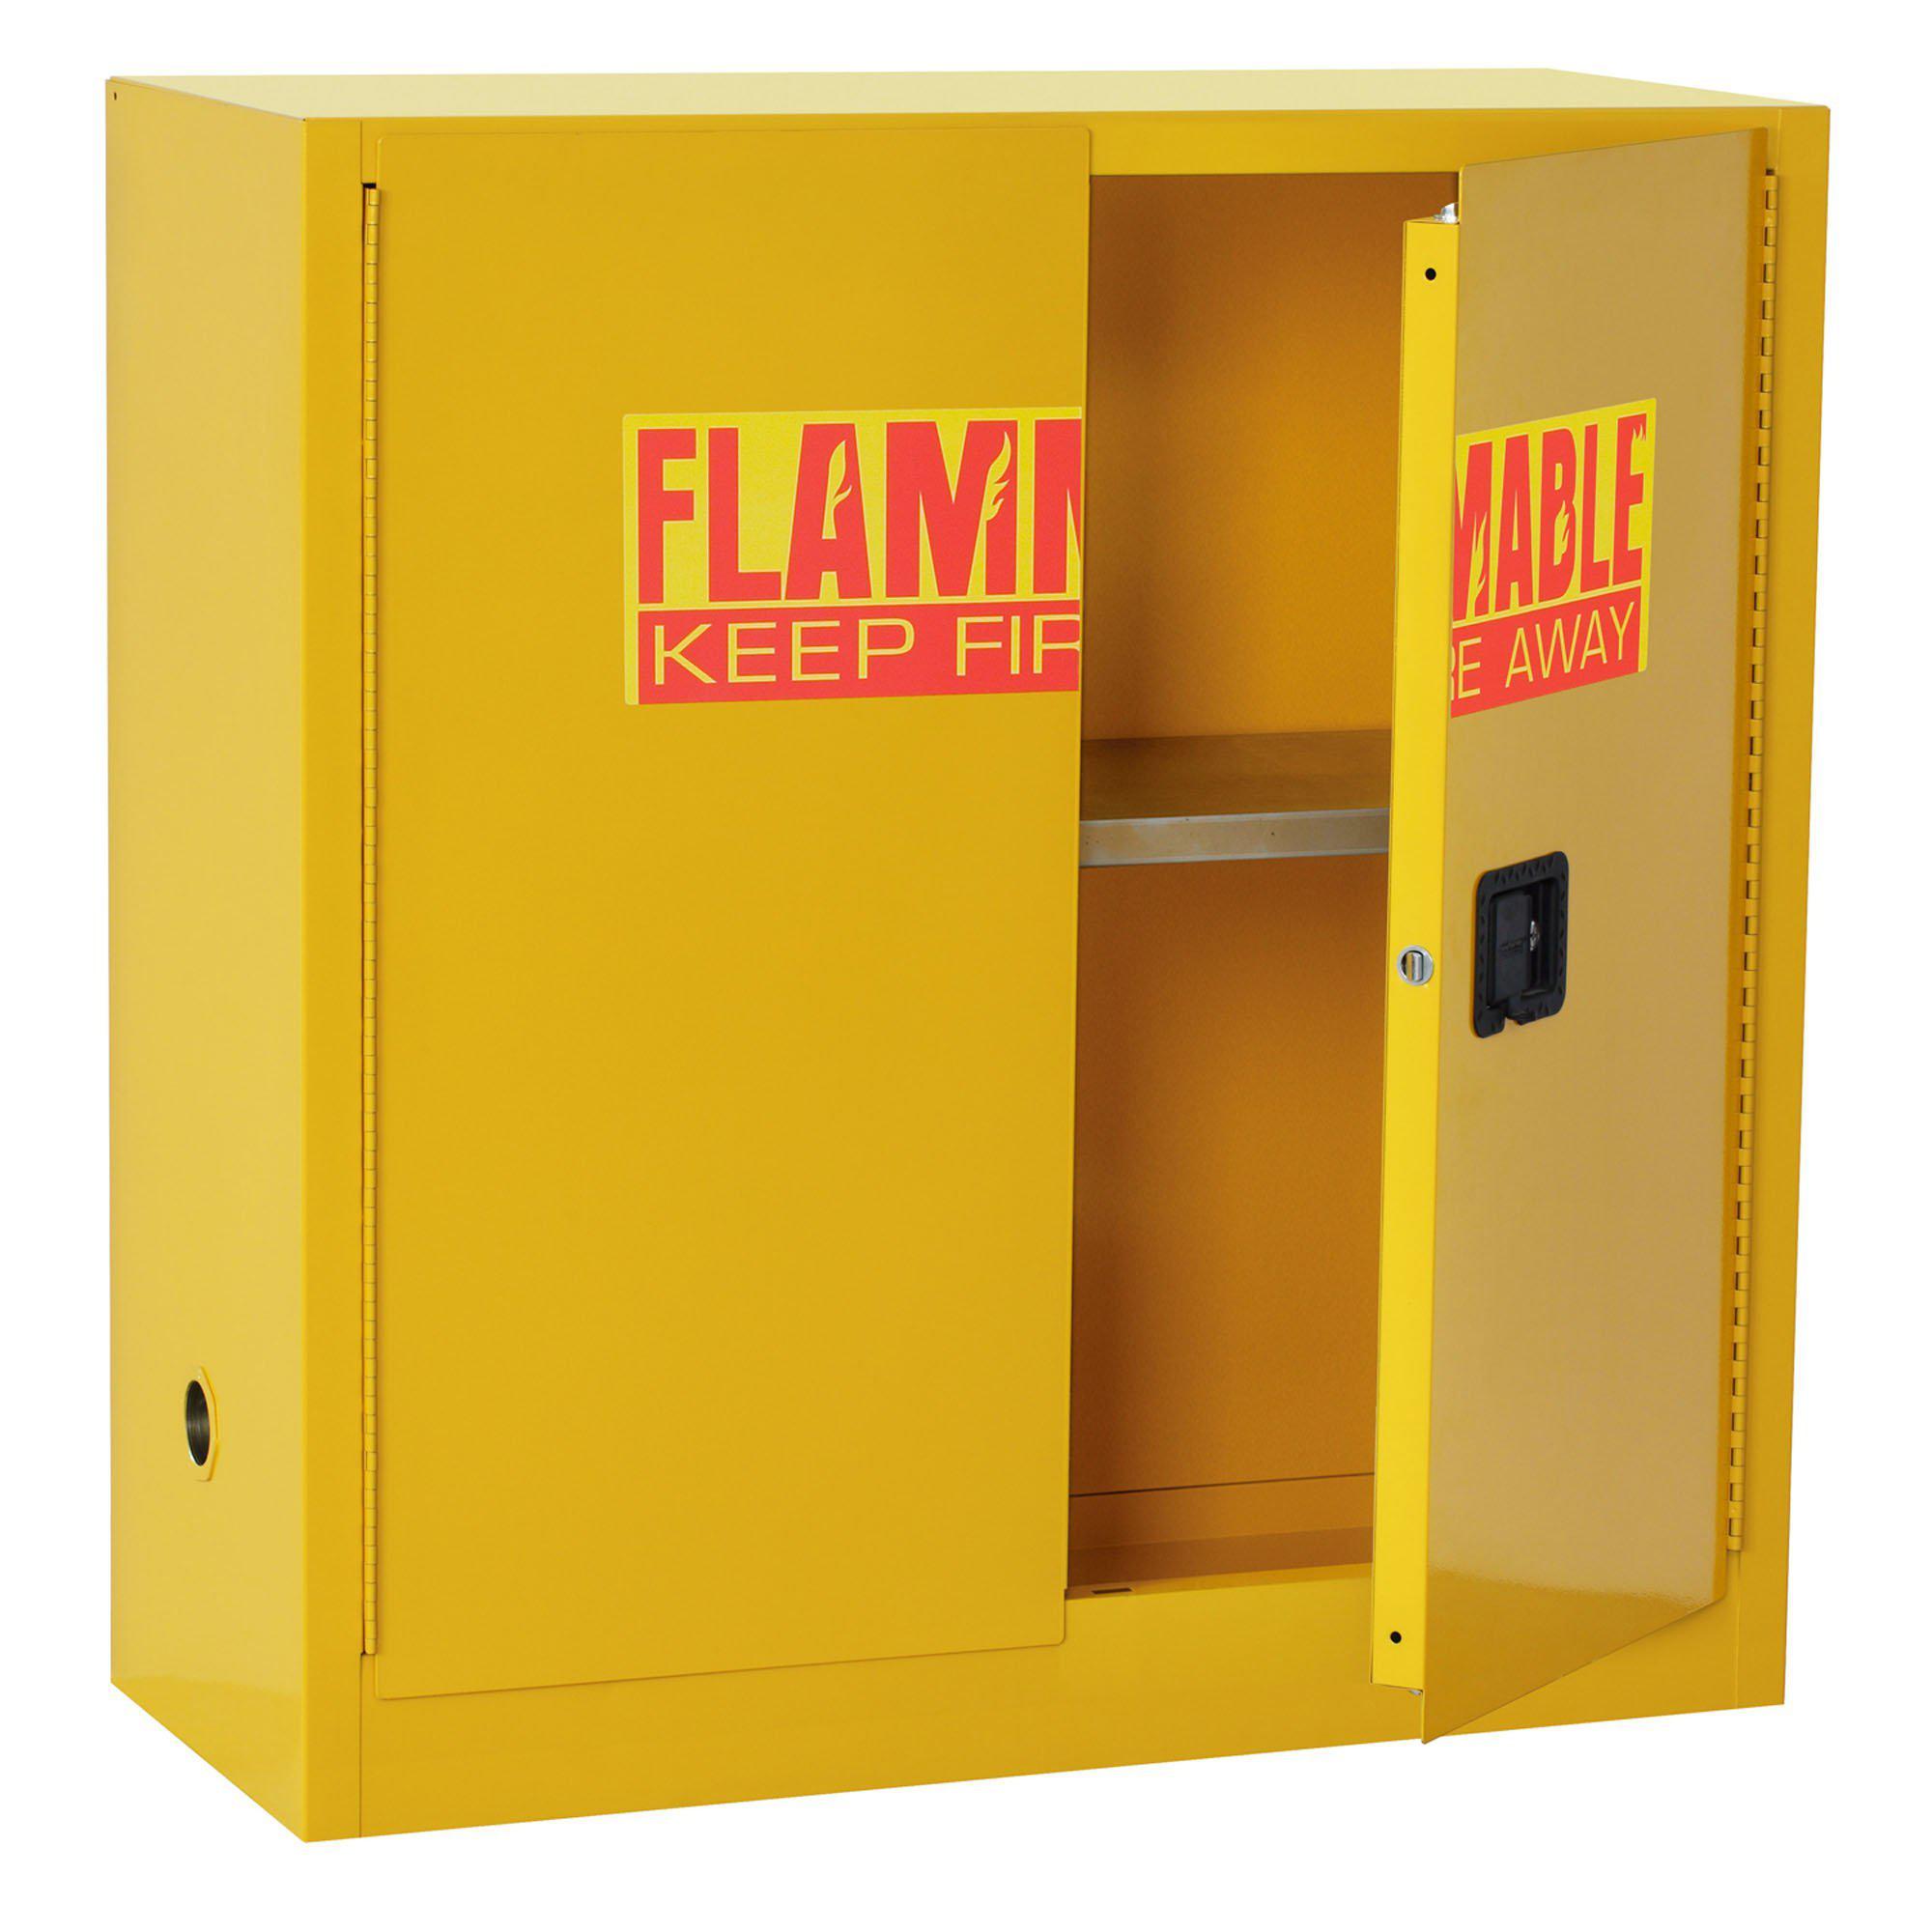 Counter Height Flammable Safety Cabinet, 30 Gallon Capacity, Safety Yellow, 43 x 18 x 44